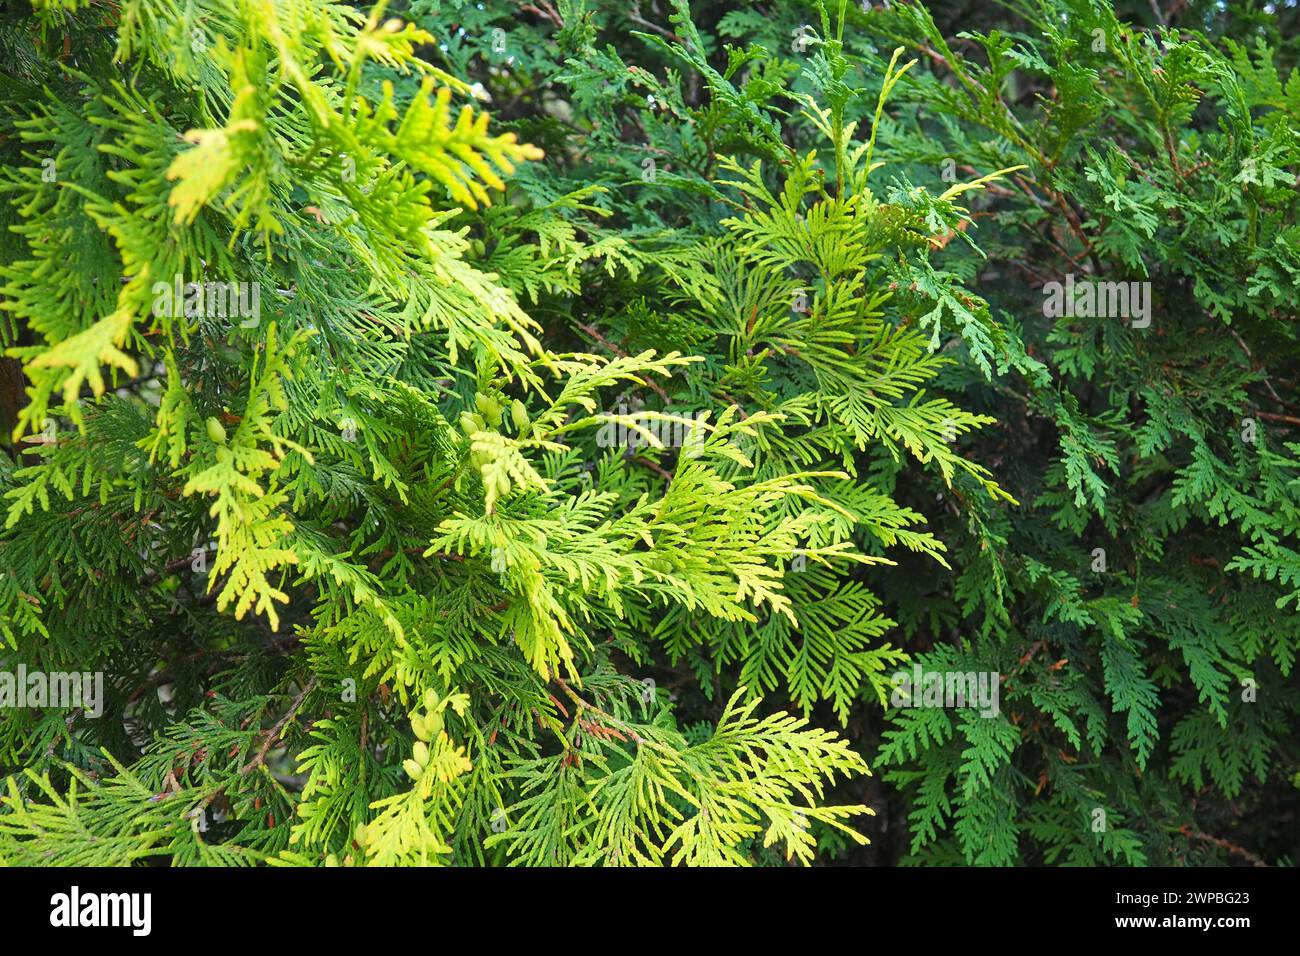 Shaping the crown of thuja. Garden and park. Floriculture and horticulture. Landscaping of urban and rural areas. Yellow-green leaves and needles of Stock Photo